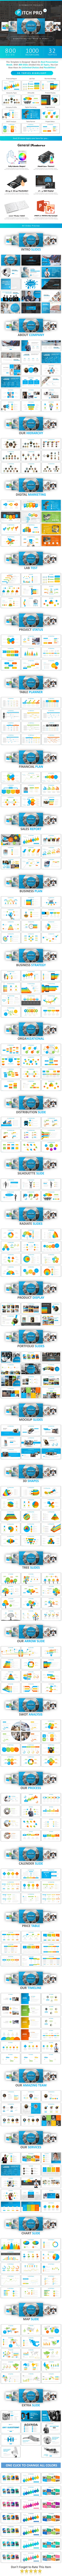 GraphicRiver Pitch Pro Creative Powerpoint 20830666